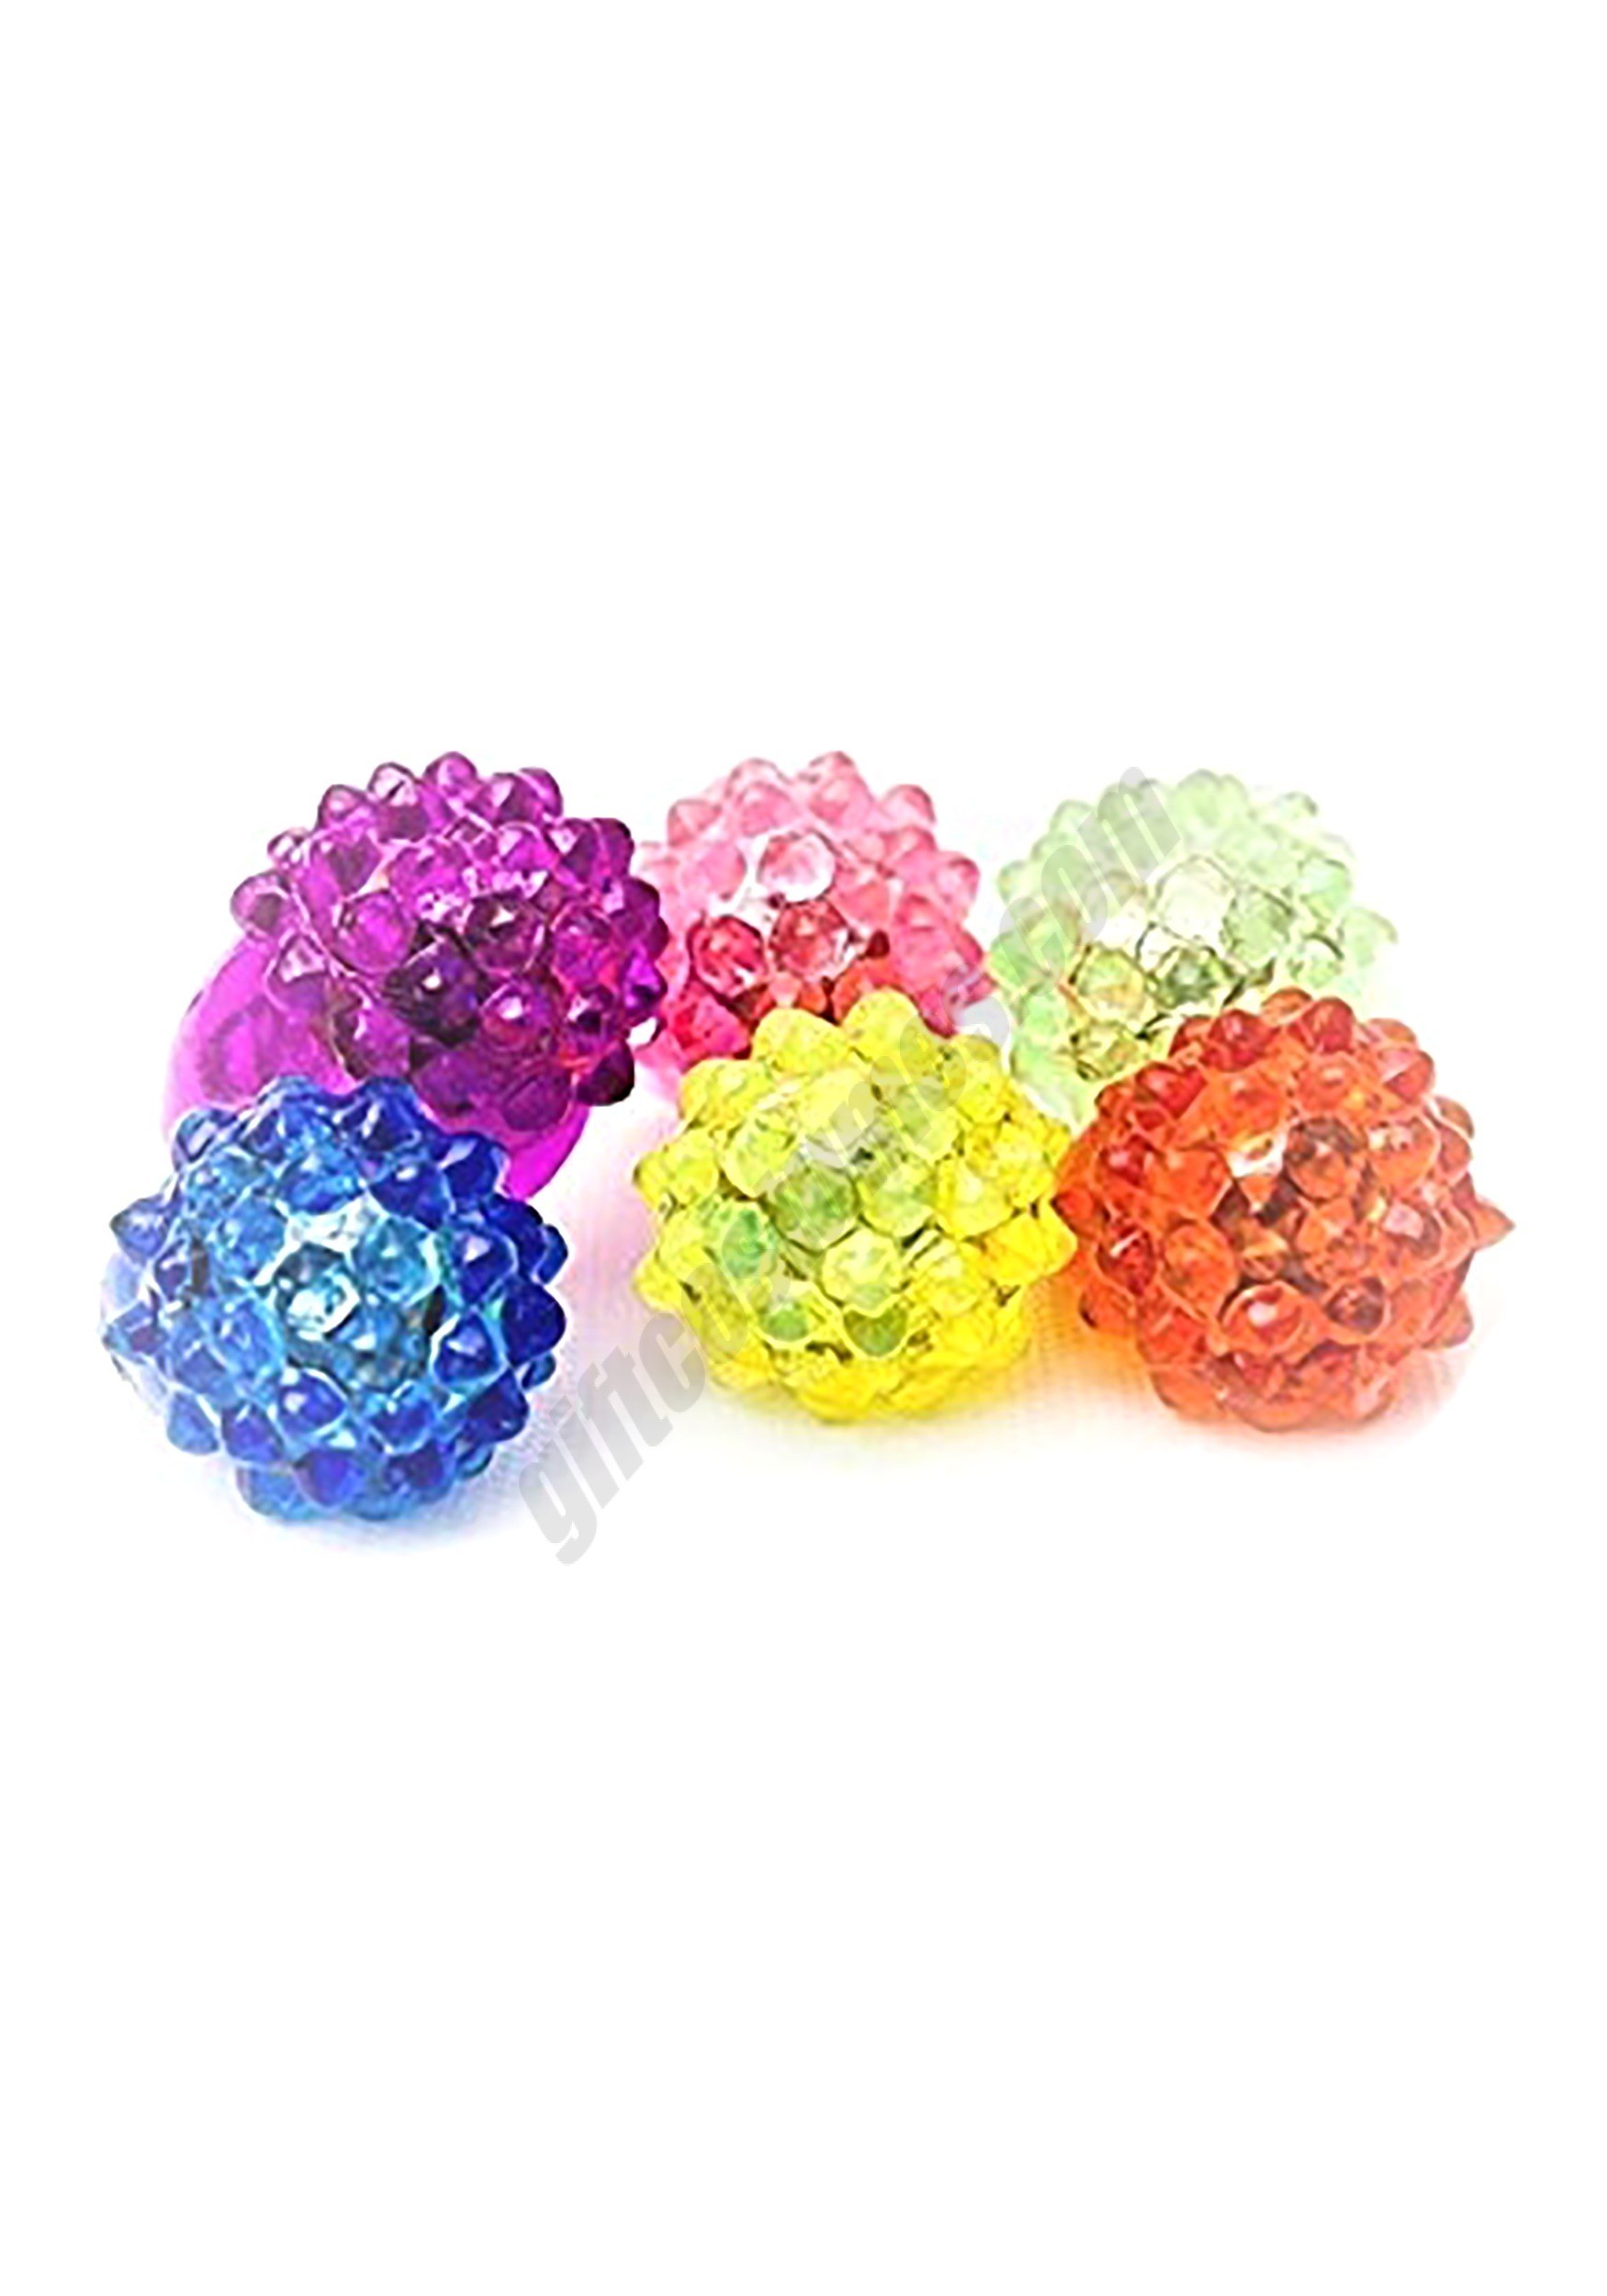 Assorted Colors Strawberry Bump Flashing Ring Promotions - Assorted Colors Strawberry Bump Flashing Ring Promotions